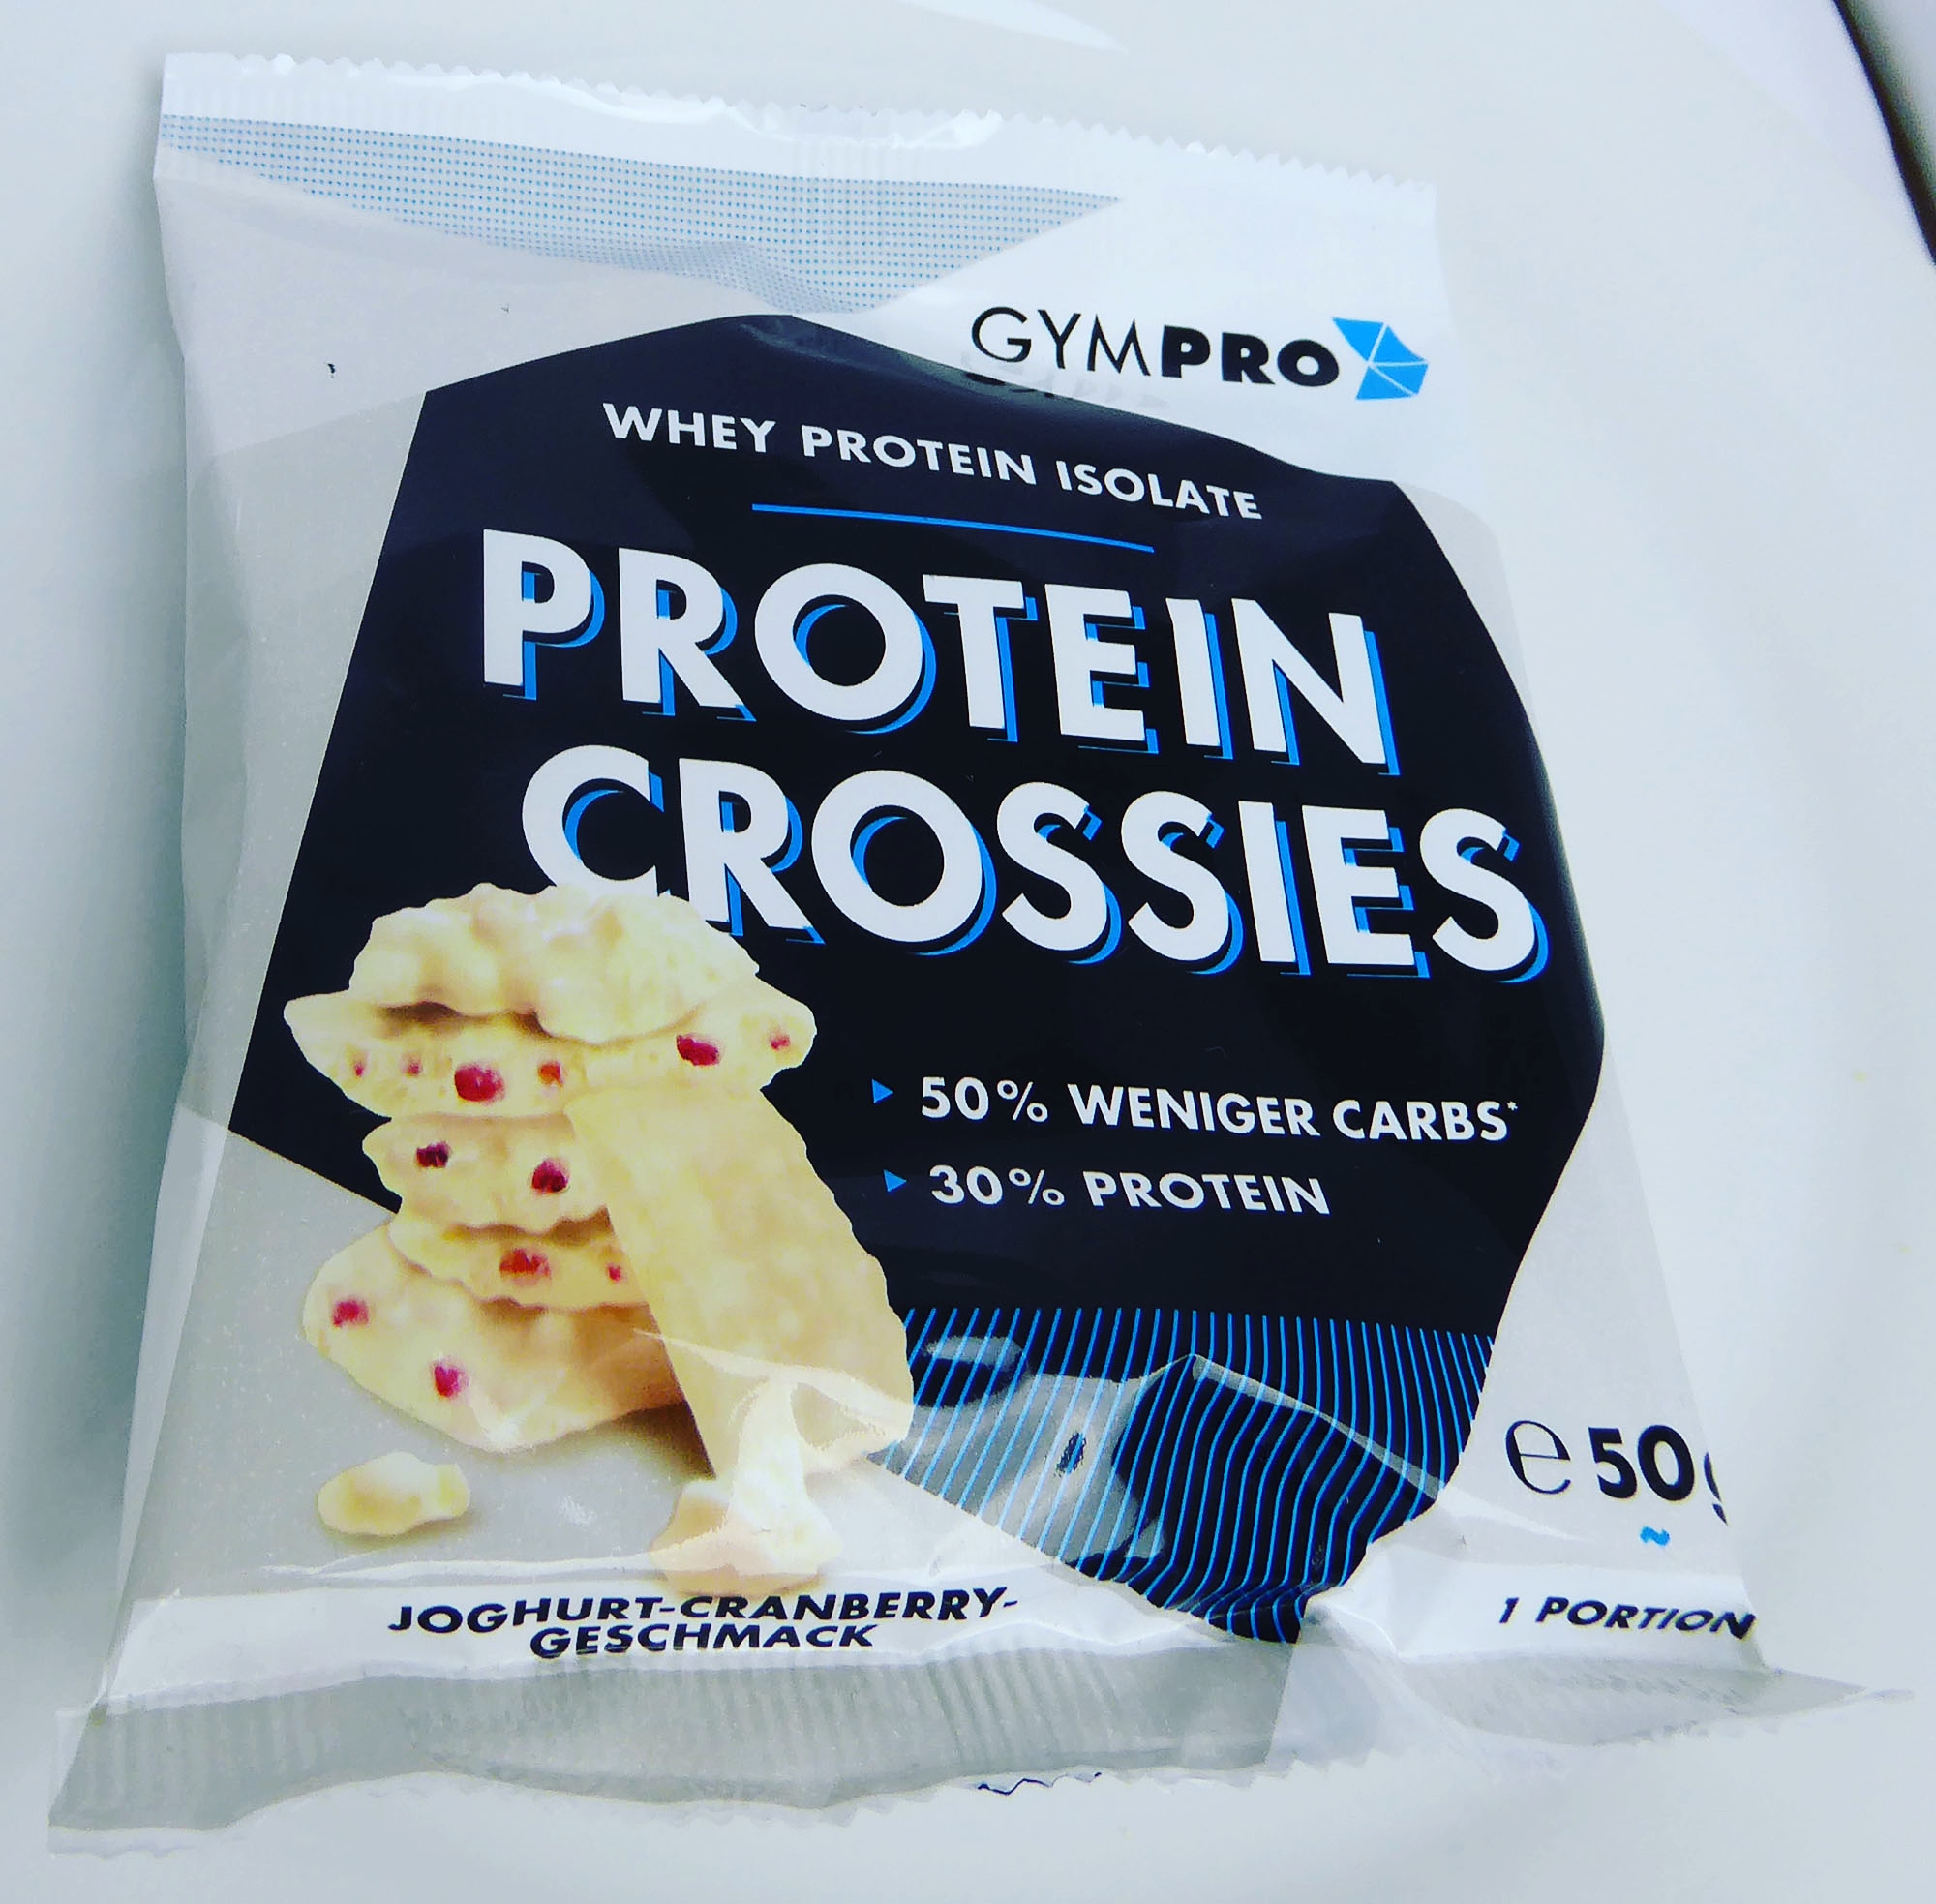 GymPro Whey Protein Isolate Crossies Yoghurt Cranberry White Chocolate